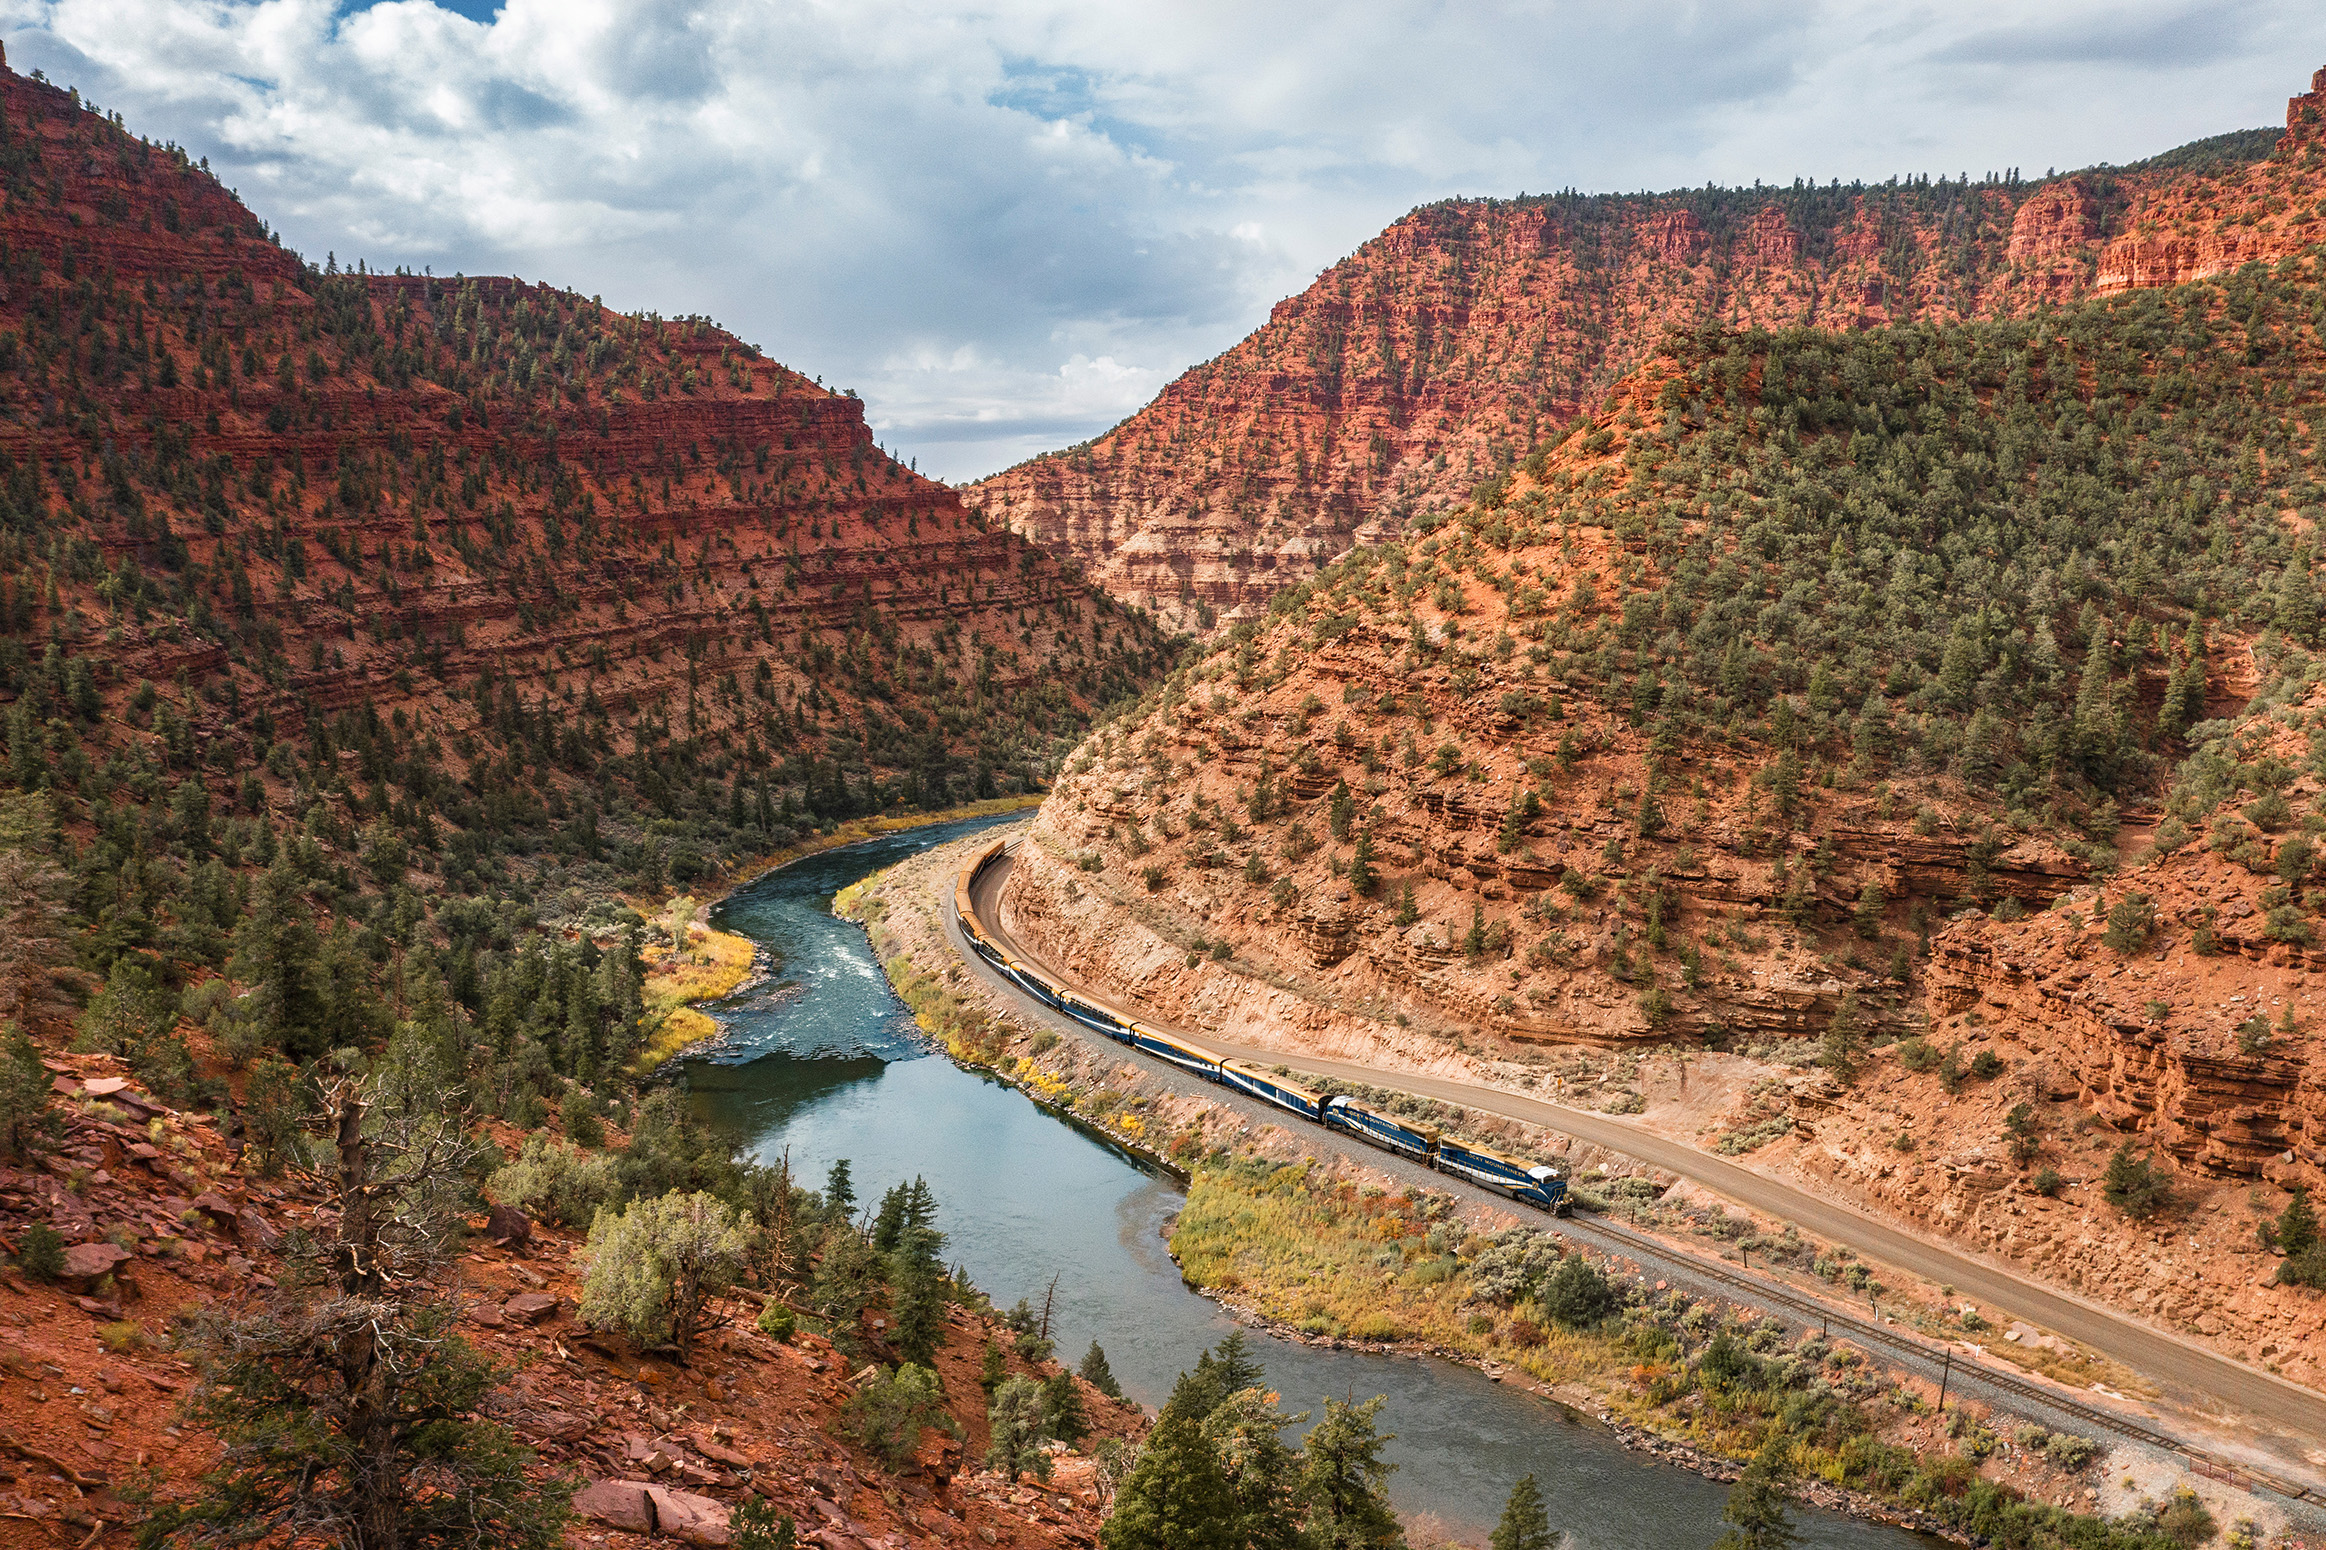 https://www.rockymountaineer.com/sites/default/files/route_image/Retouched_RM21_RM-USE-ONLY_RTR_red-canyon_0024%20%28003%29.jpg